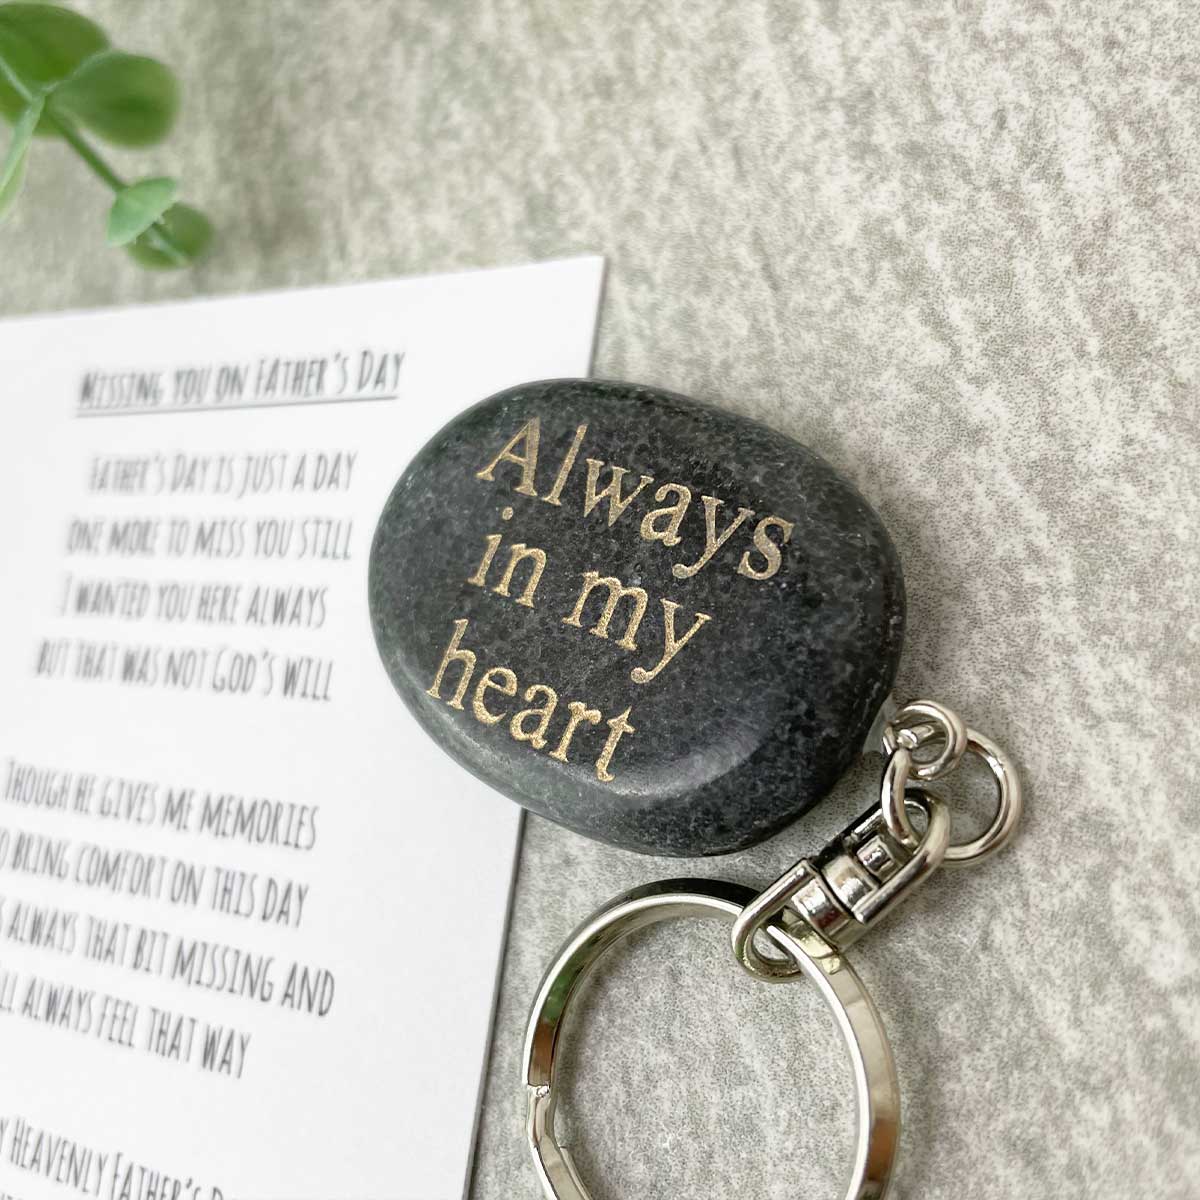 Missing You On Father's Day Poem & Keyring